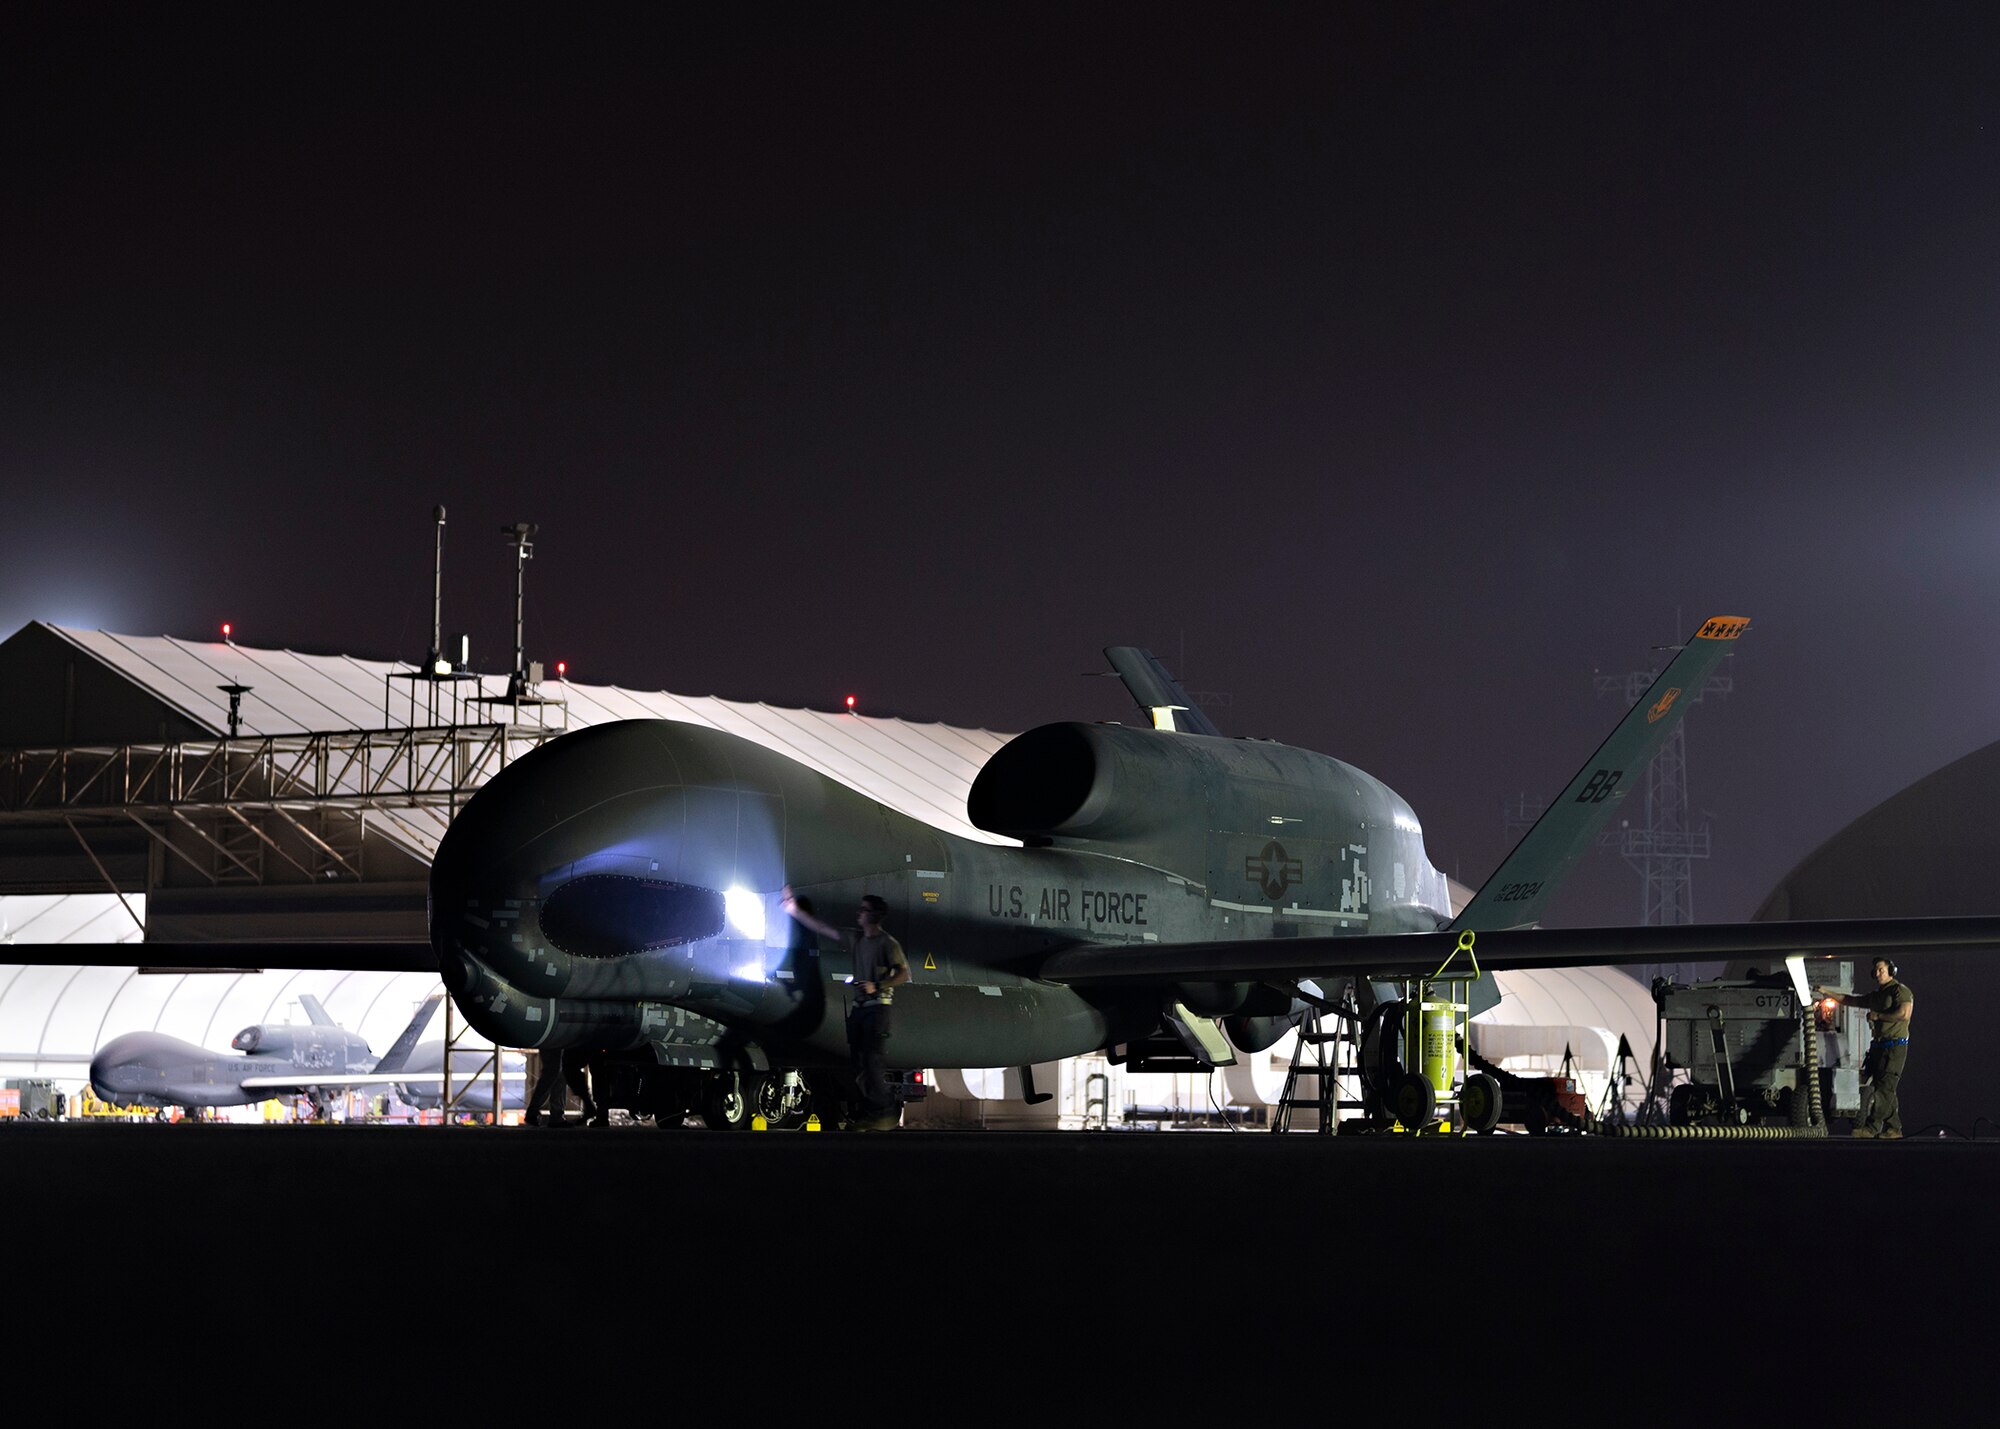 Night owl maintainers launch Global Hawks